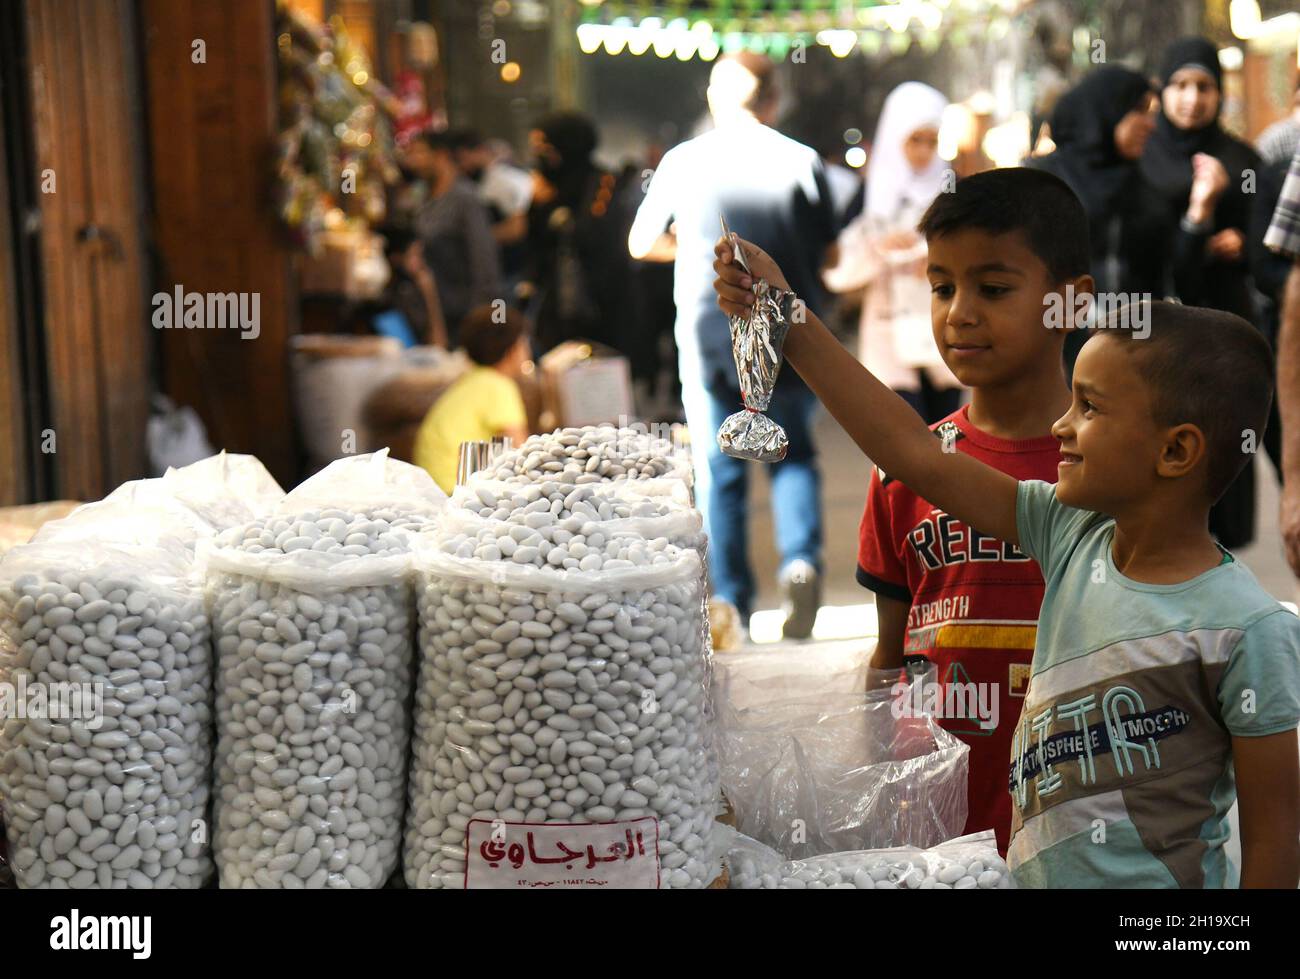 Damascus, Syria. 17th Oct, 2021. Children buy sugared almonds at a market on the occasion of the birthday of Prophet Muhammad in Damascus, Syria, on Oct. 17, 2021. Credit: Ammar Safarjalani/Xinhua/Alamy Live News Stock Photo